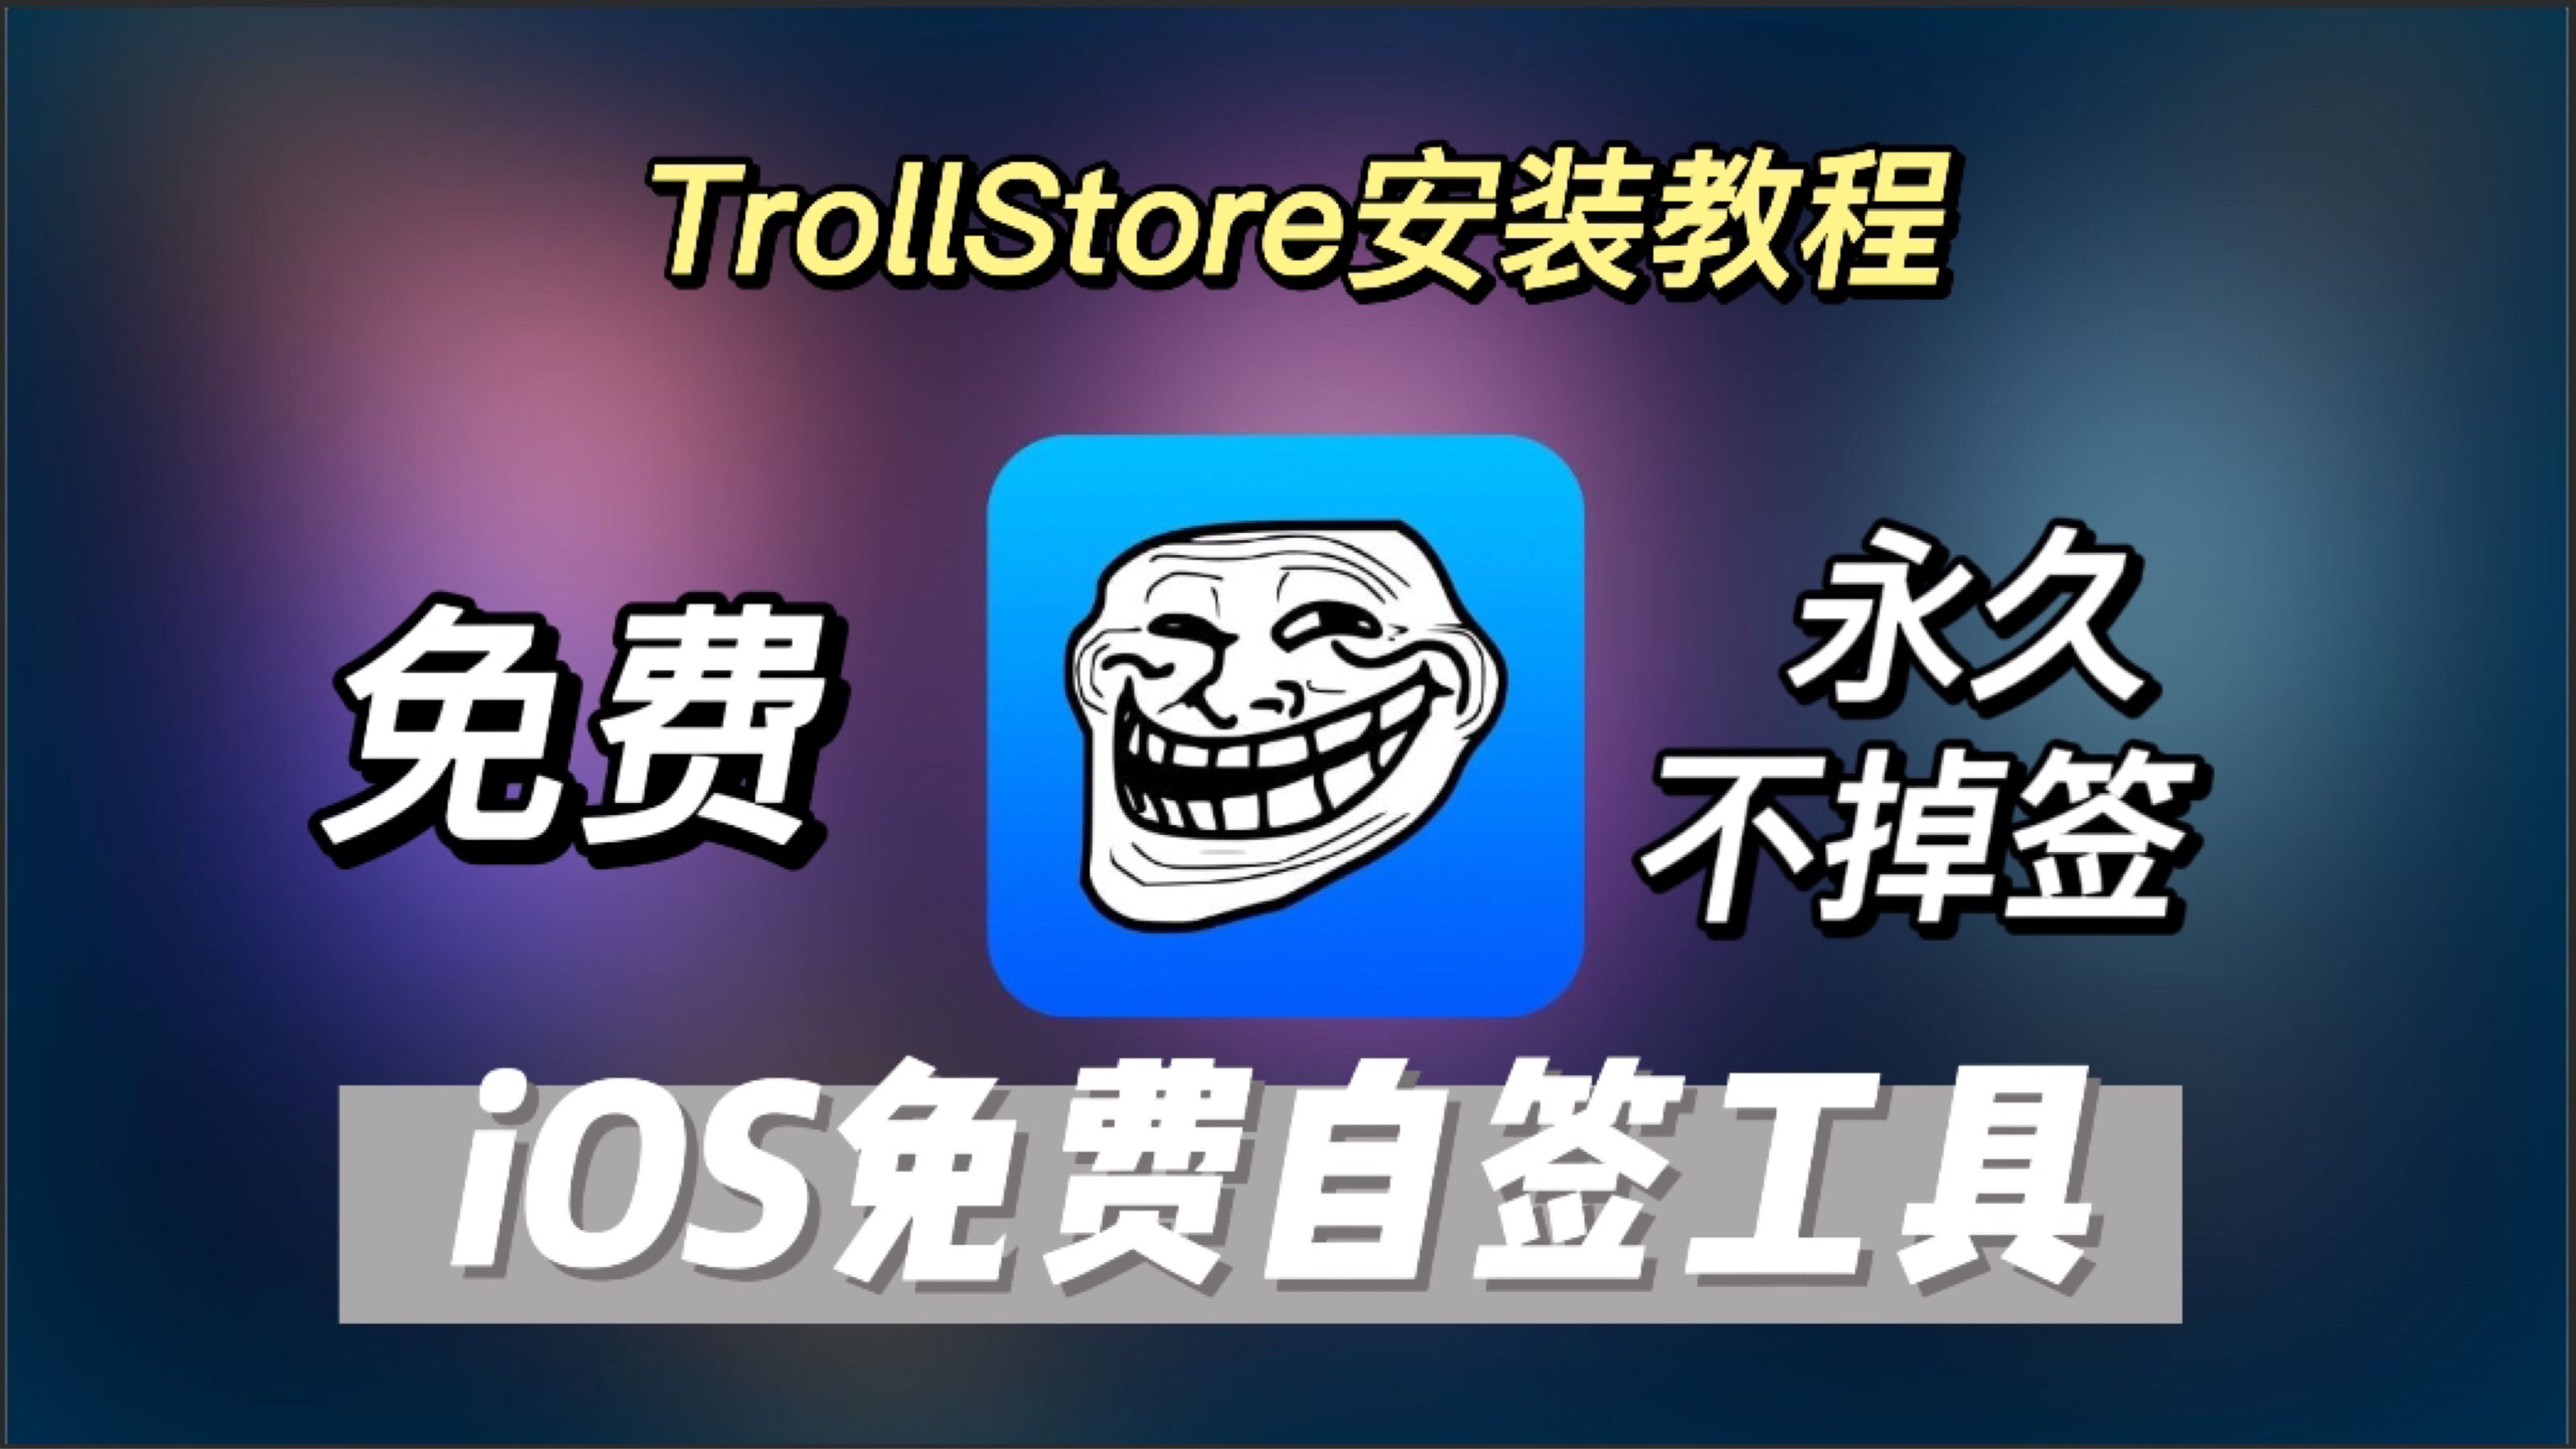 How to install TrollStore on jailbroken iOS 14.0-14.8.1 devices